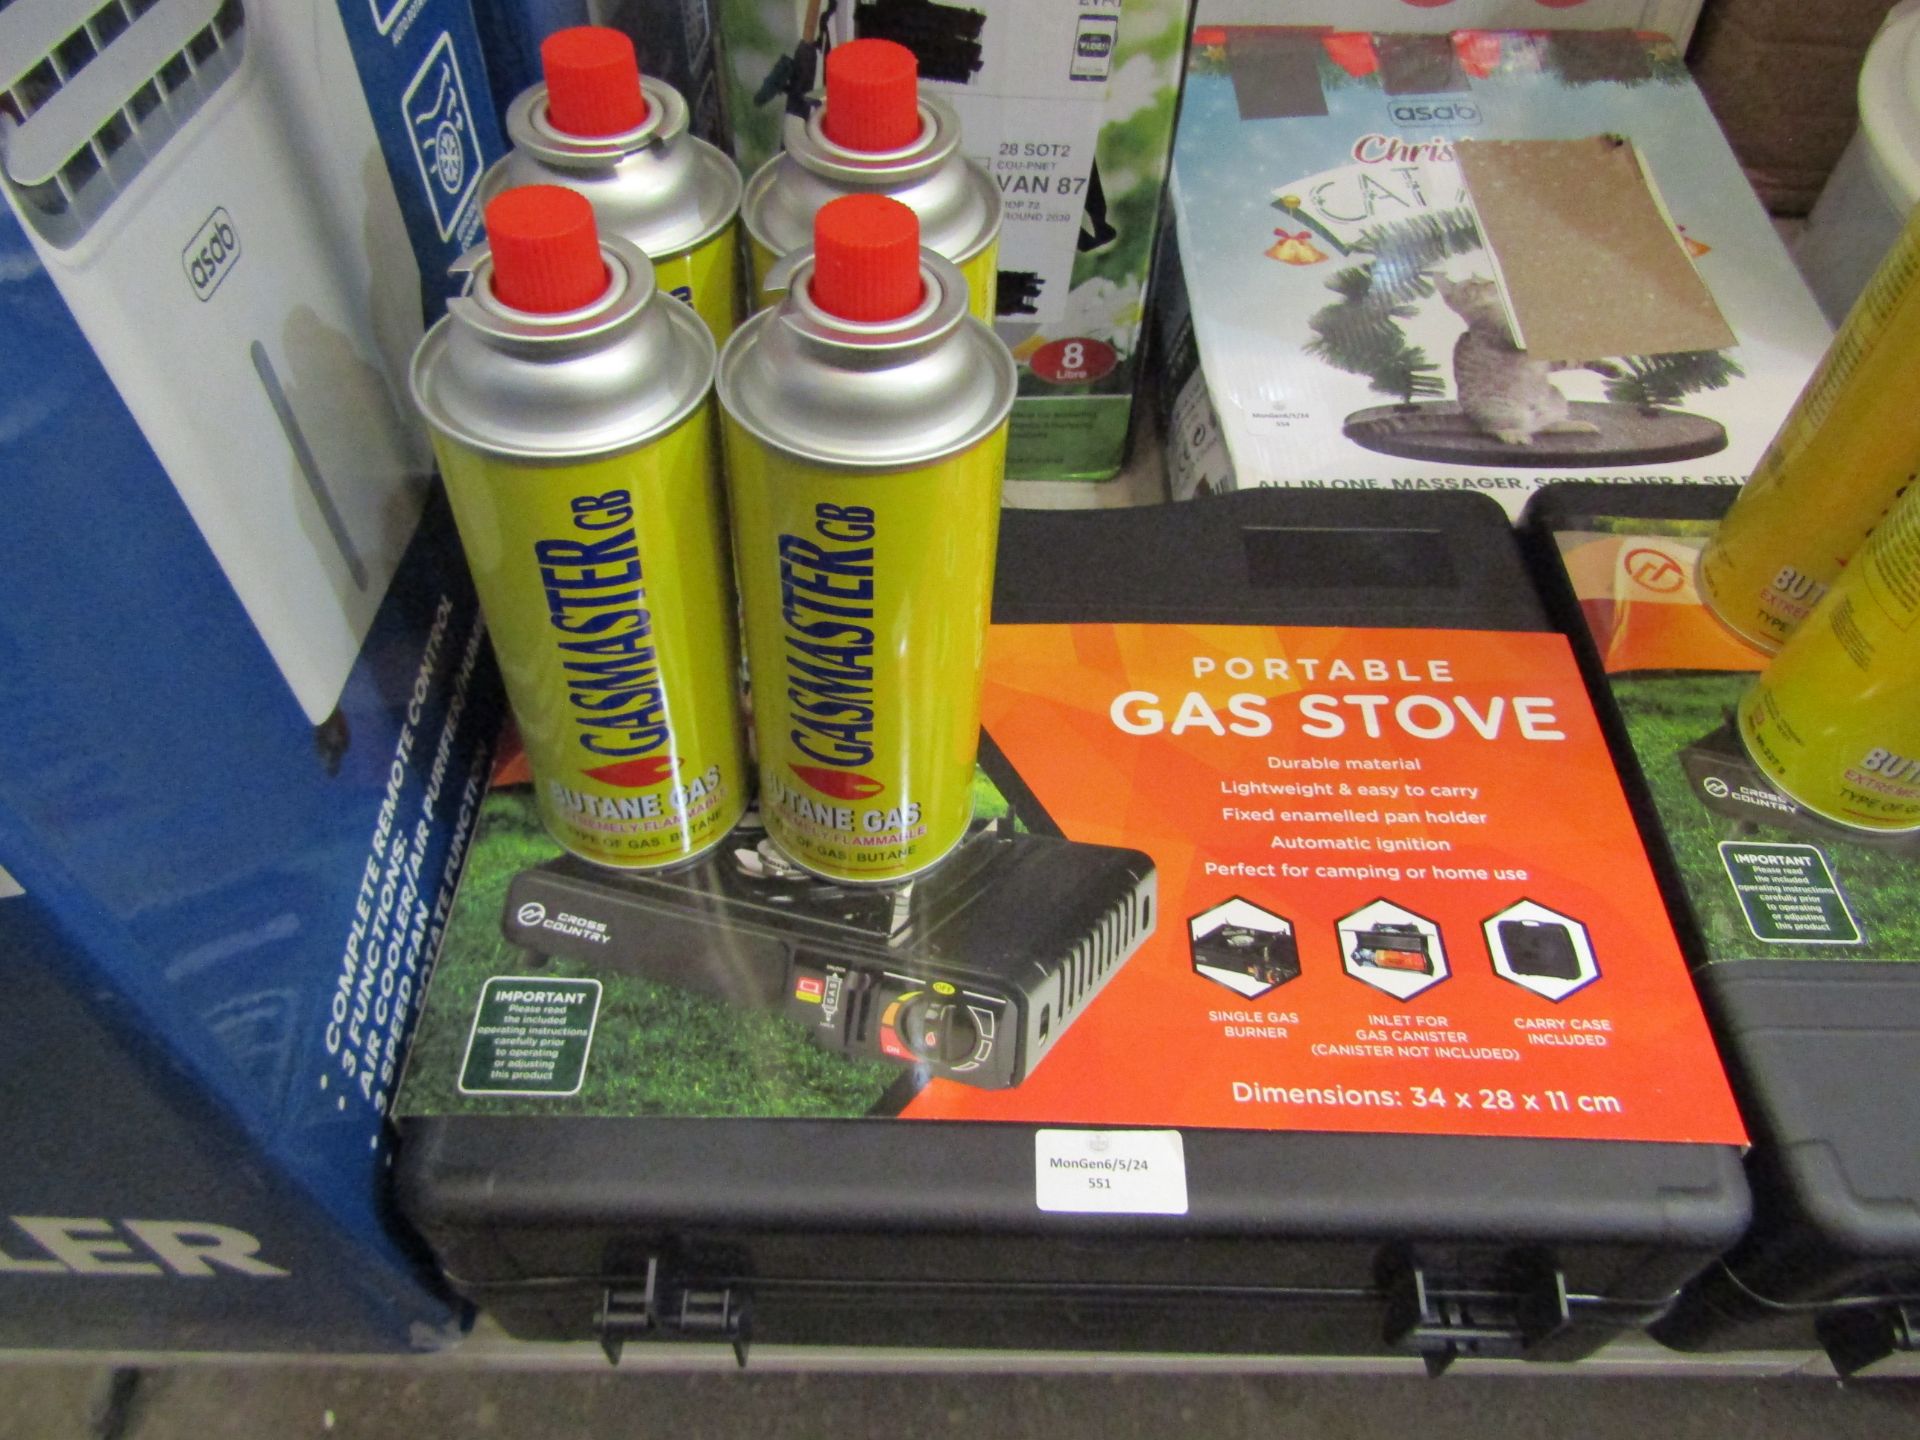 Portable Gas Stove With 4 Tins Of Butane Gas, Unchecked.